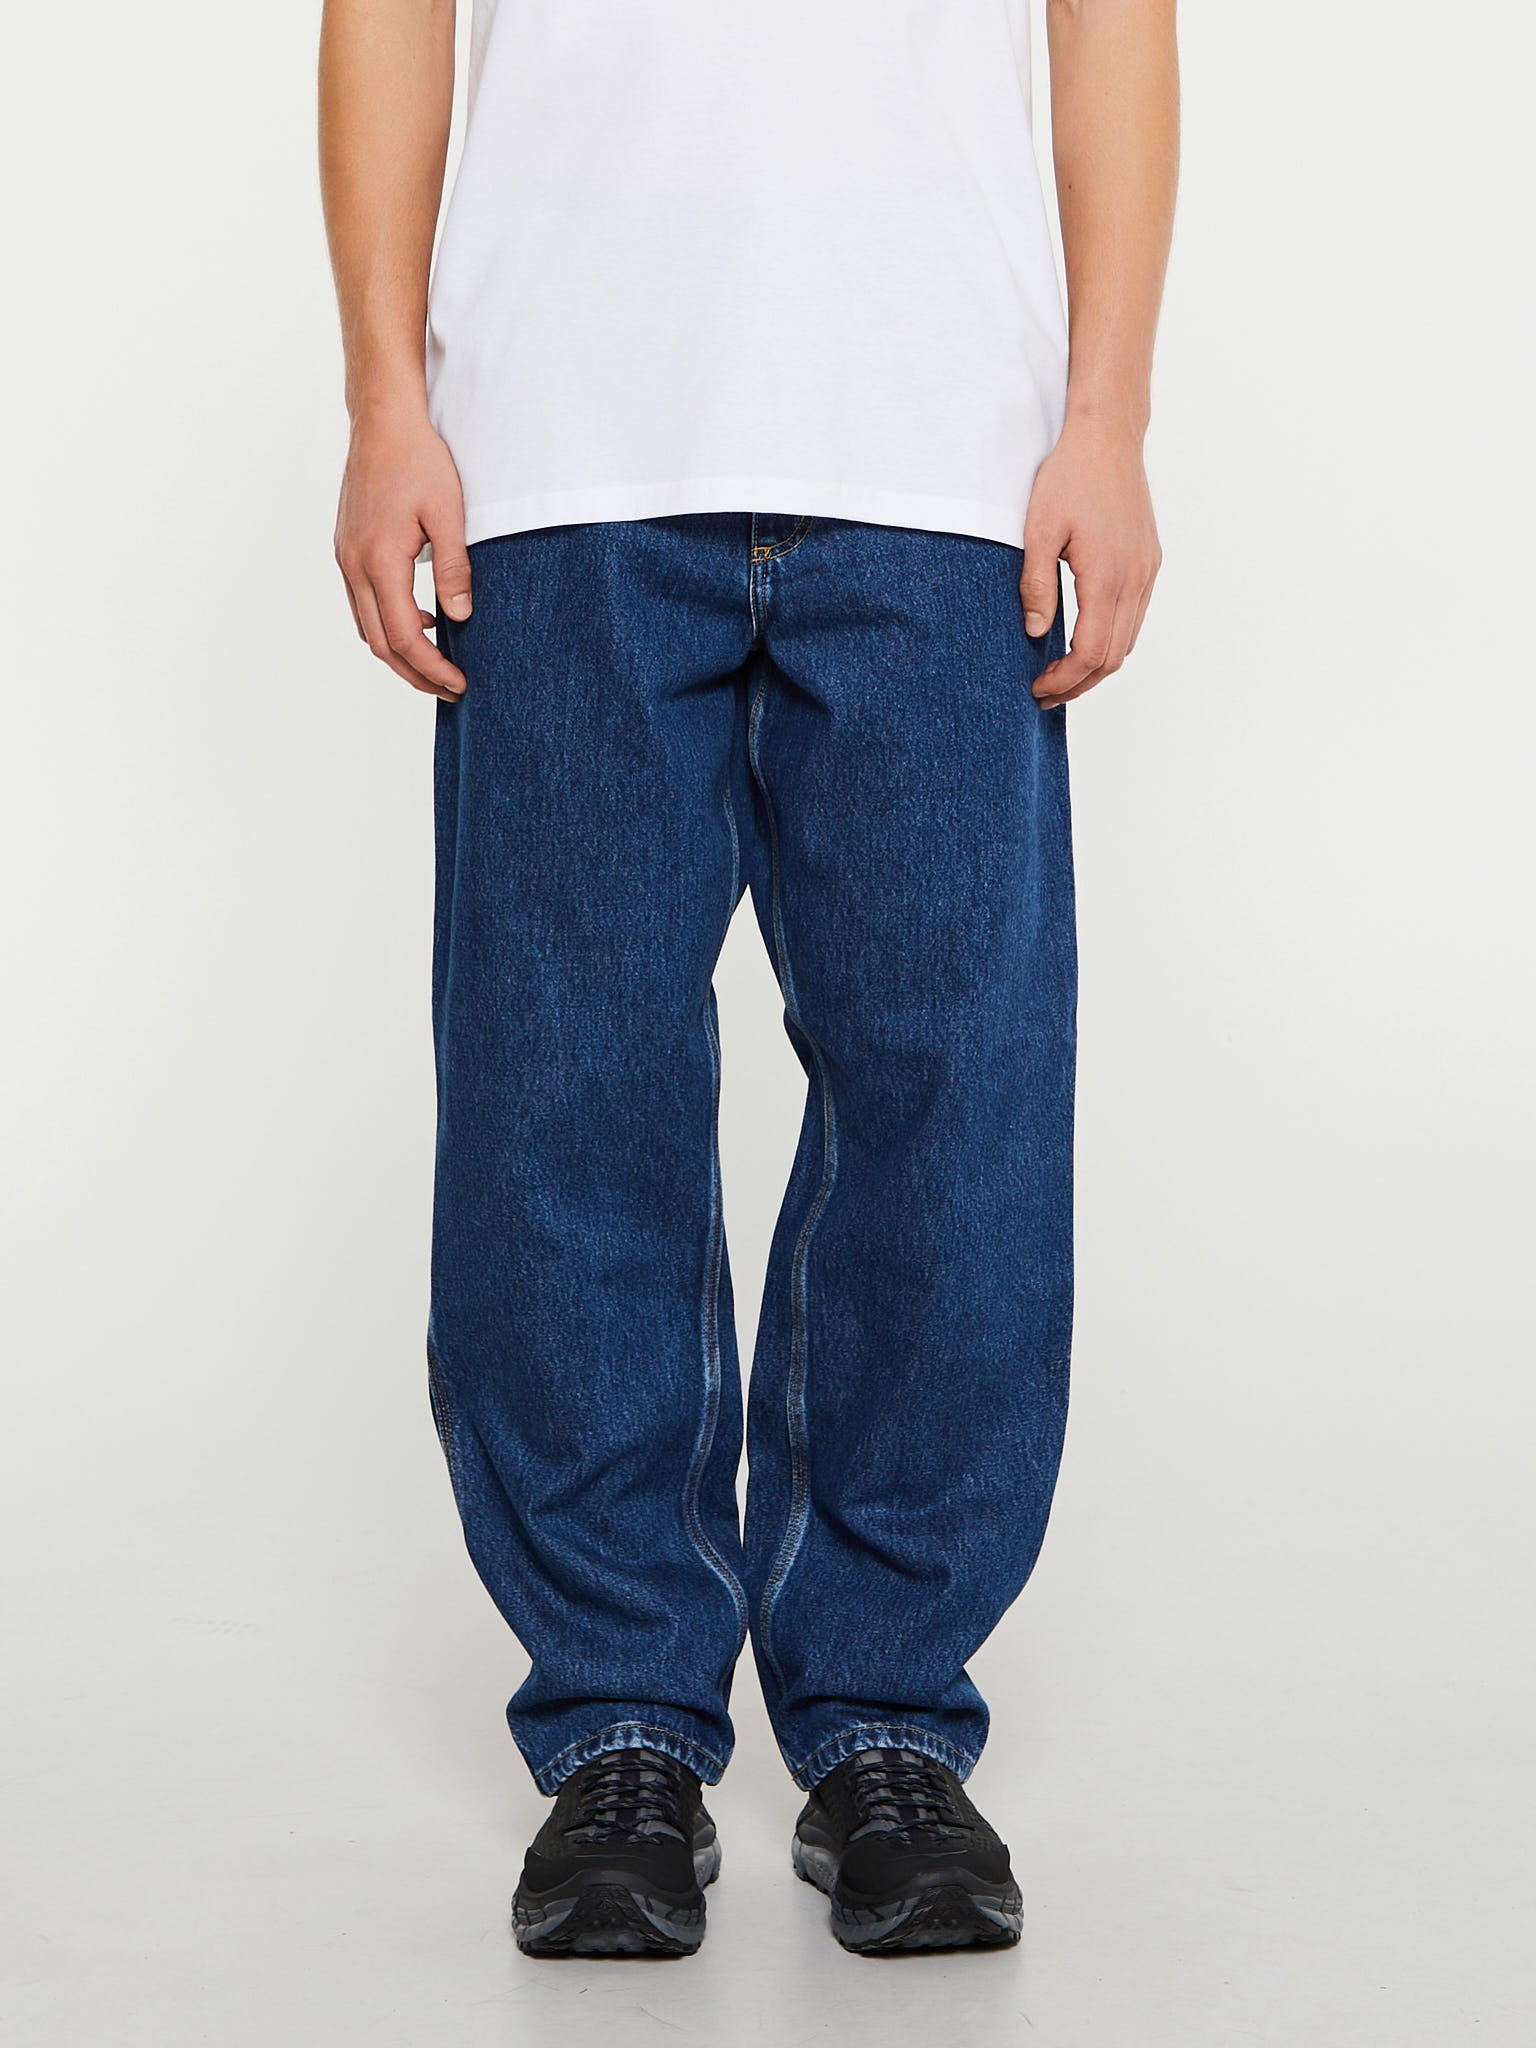 Carhartt - Single Knee Pants in Blue Stone Washed